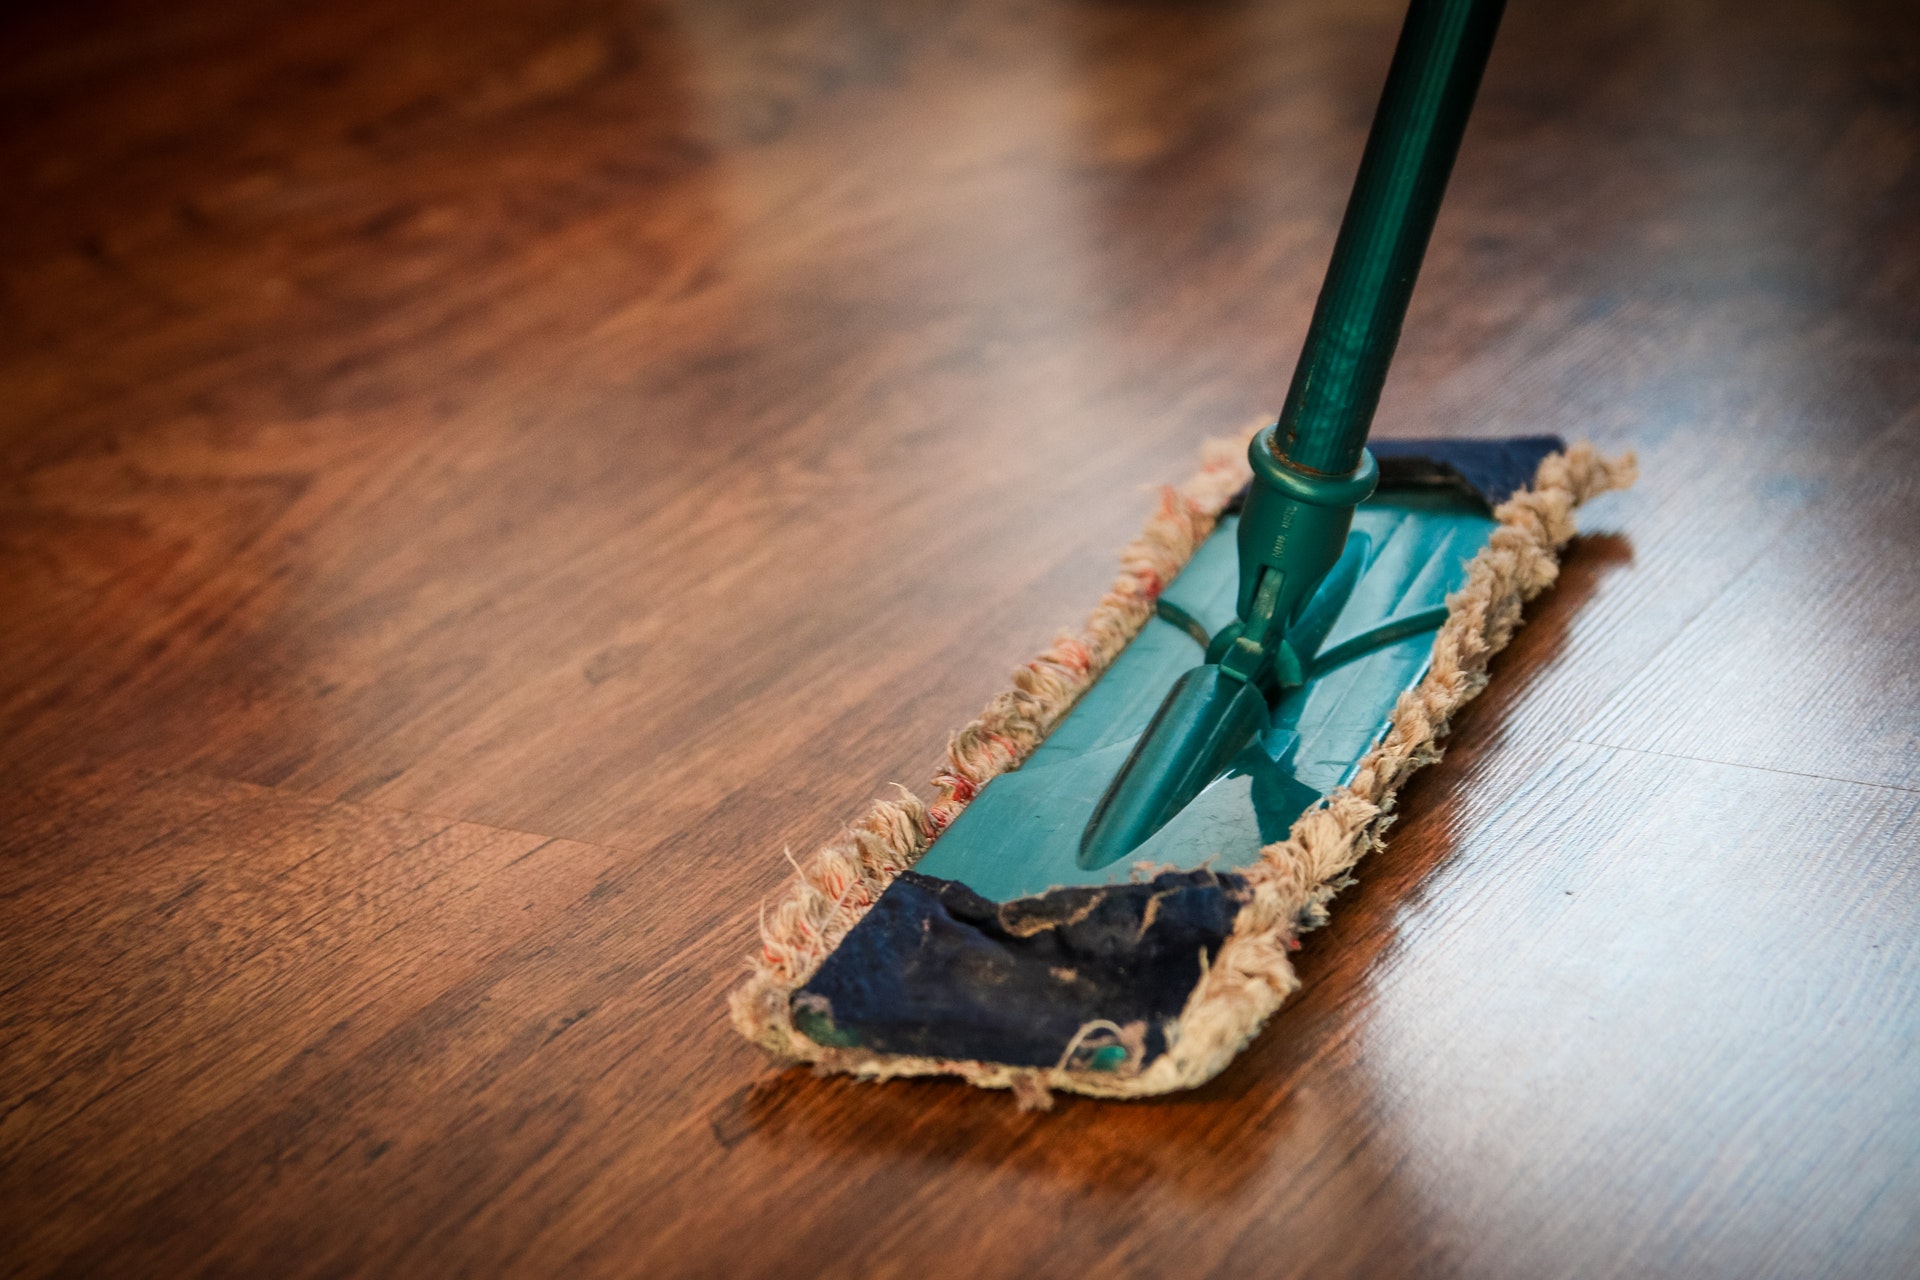 Tackle Cleaning Vinyl Plank Flooring, How To Clean Dull Vinyl Plank Flooring